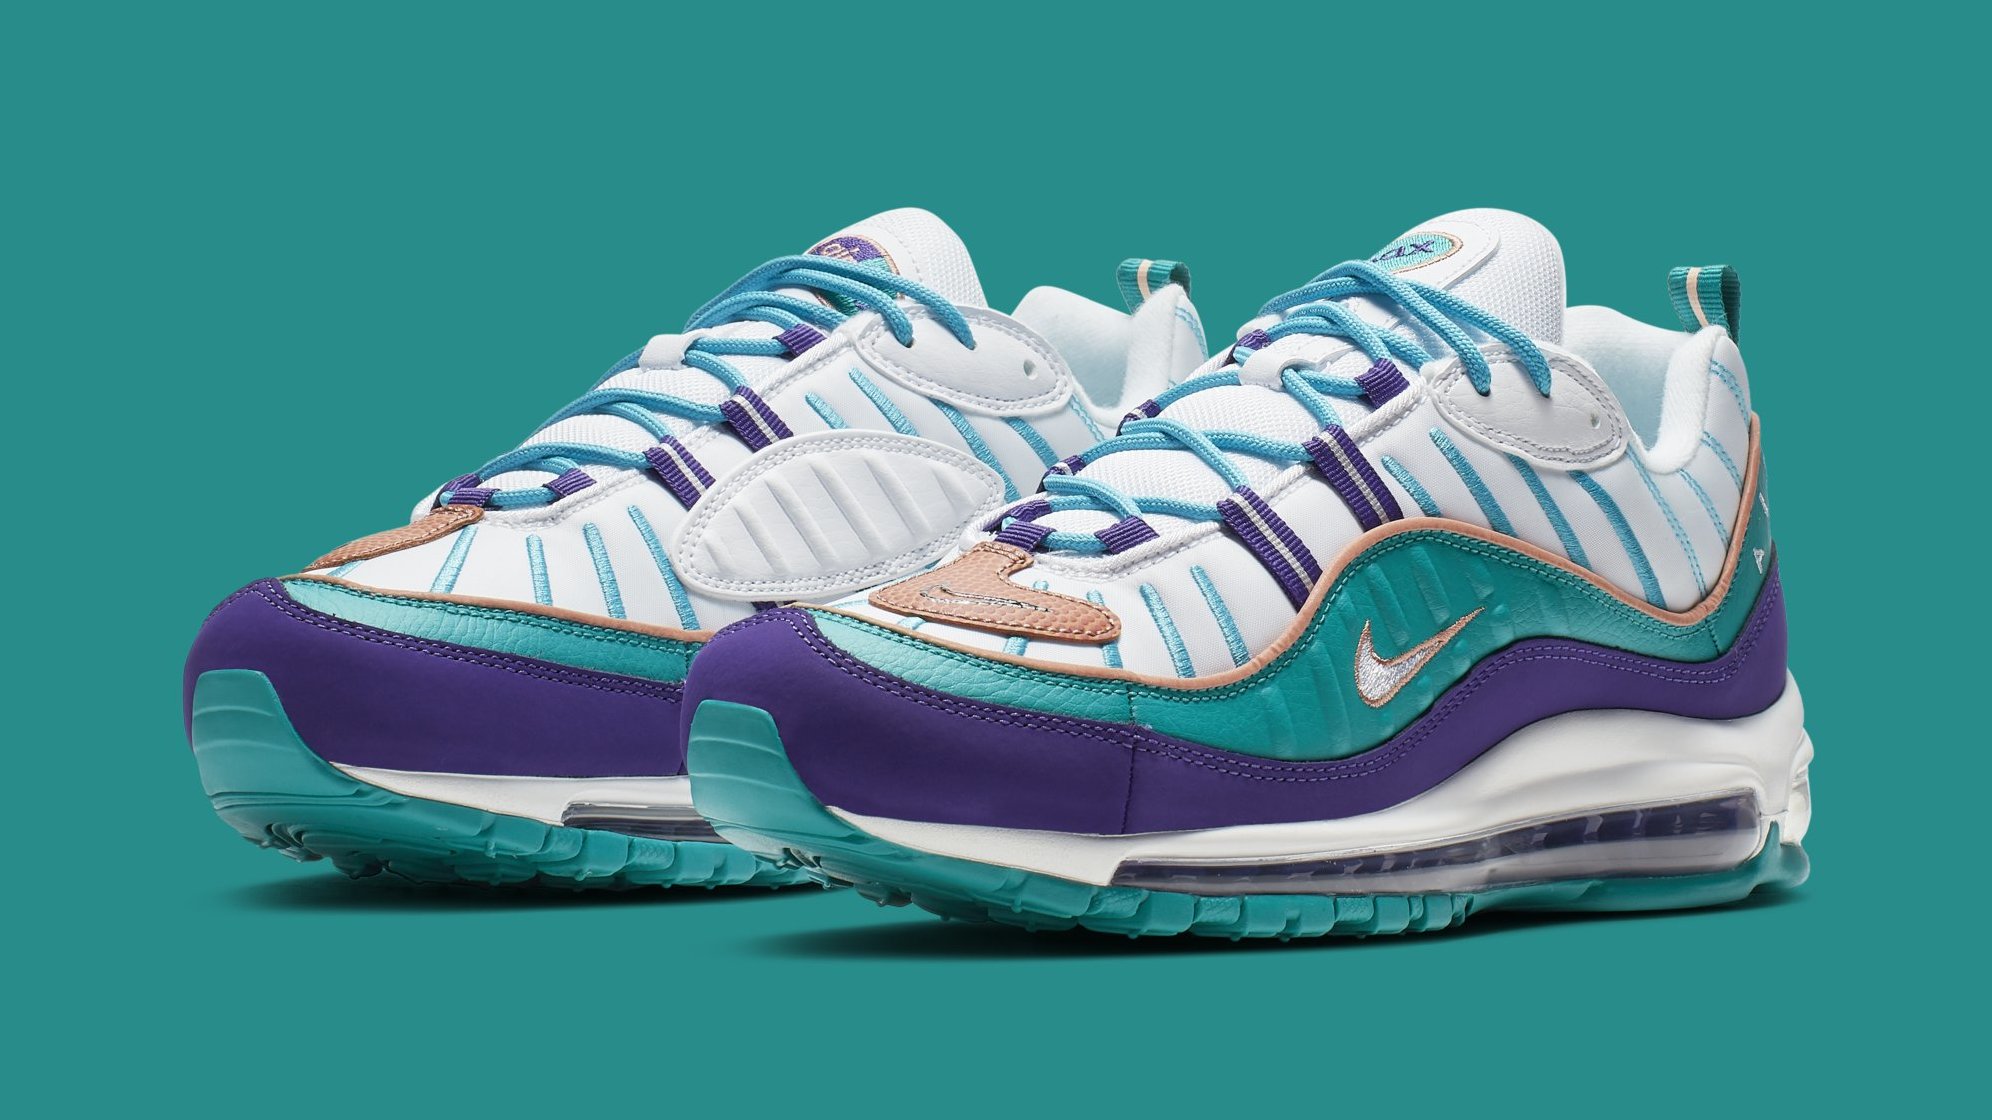 Charlotte Hornets Colors Cover This Air Max 98 | Complex